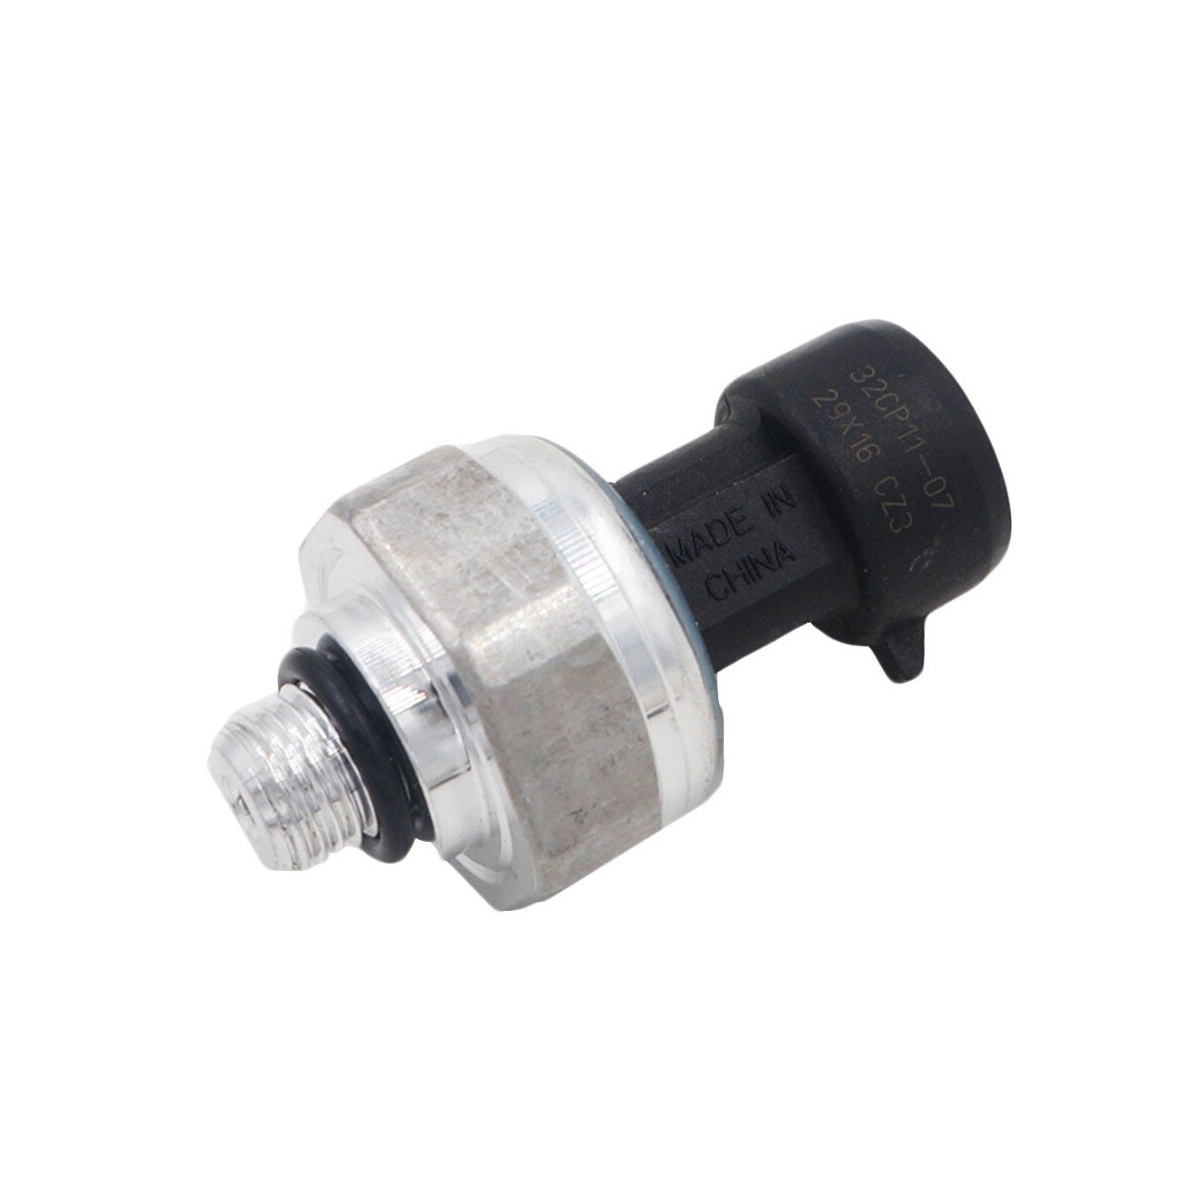 VAUXHALL AND OPEL OMEGA Air Con High Pressure Switch